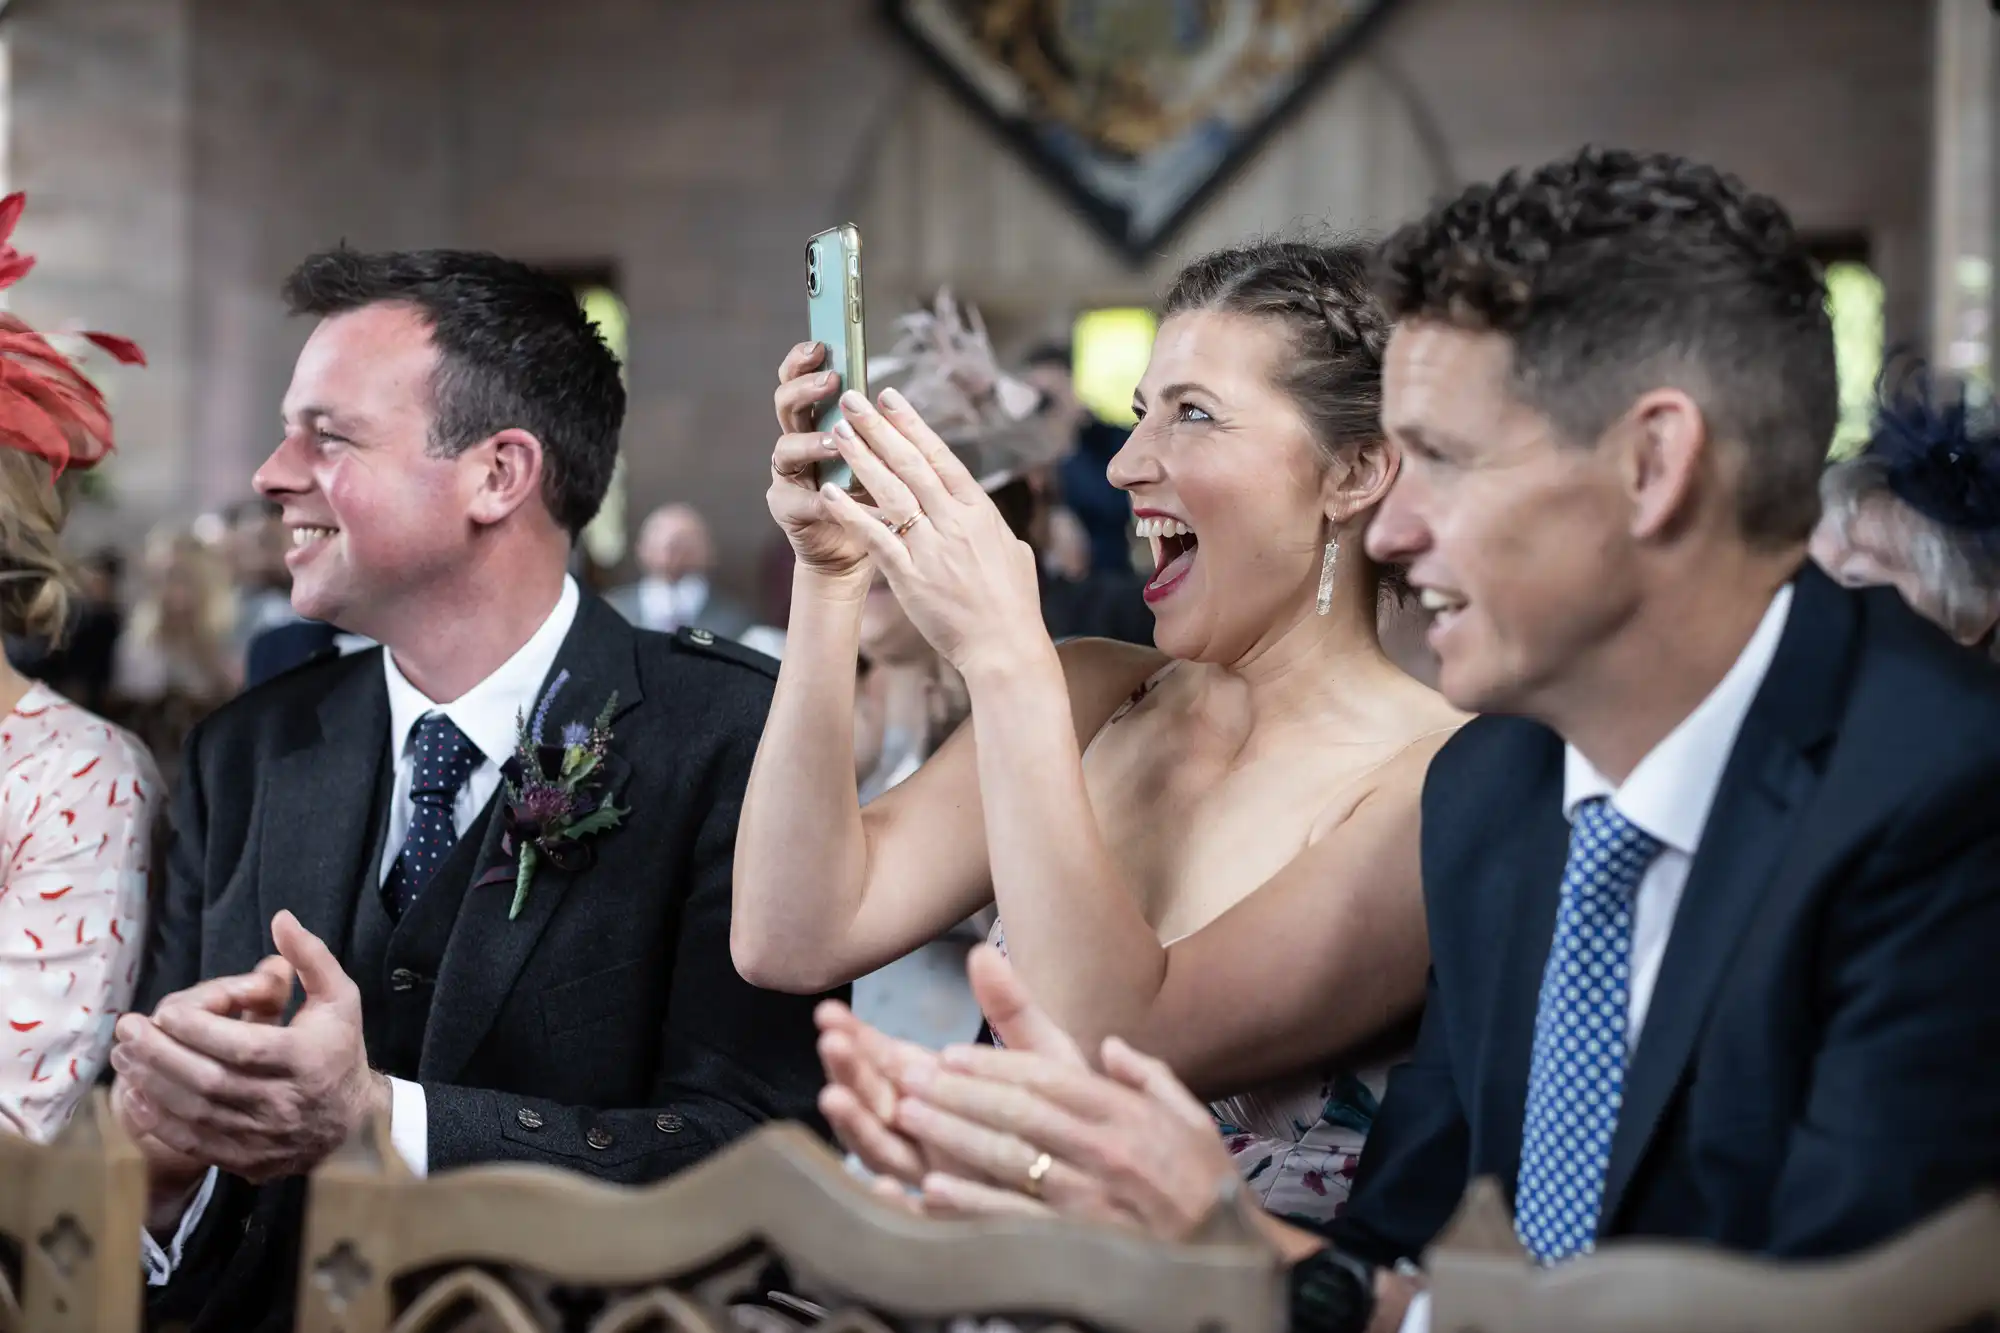 A woman joyfully recording a wedding ceremony on her smartphone, flanked by two smiling men in suits and guests in formal attire.